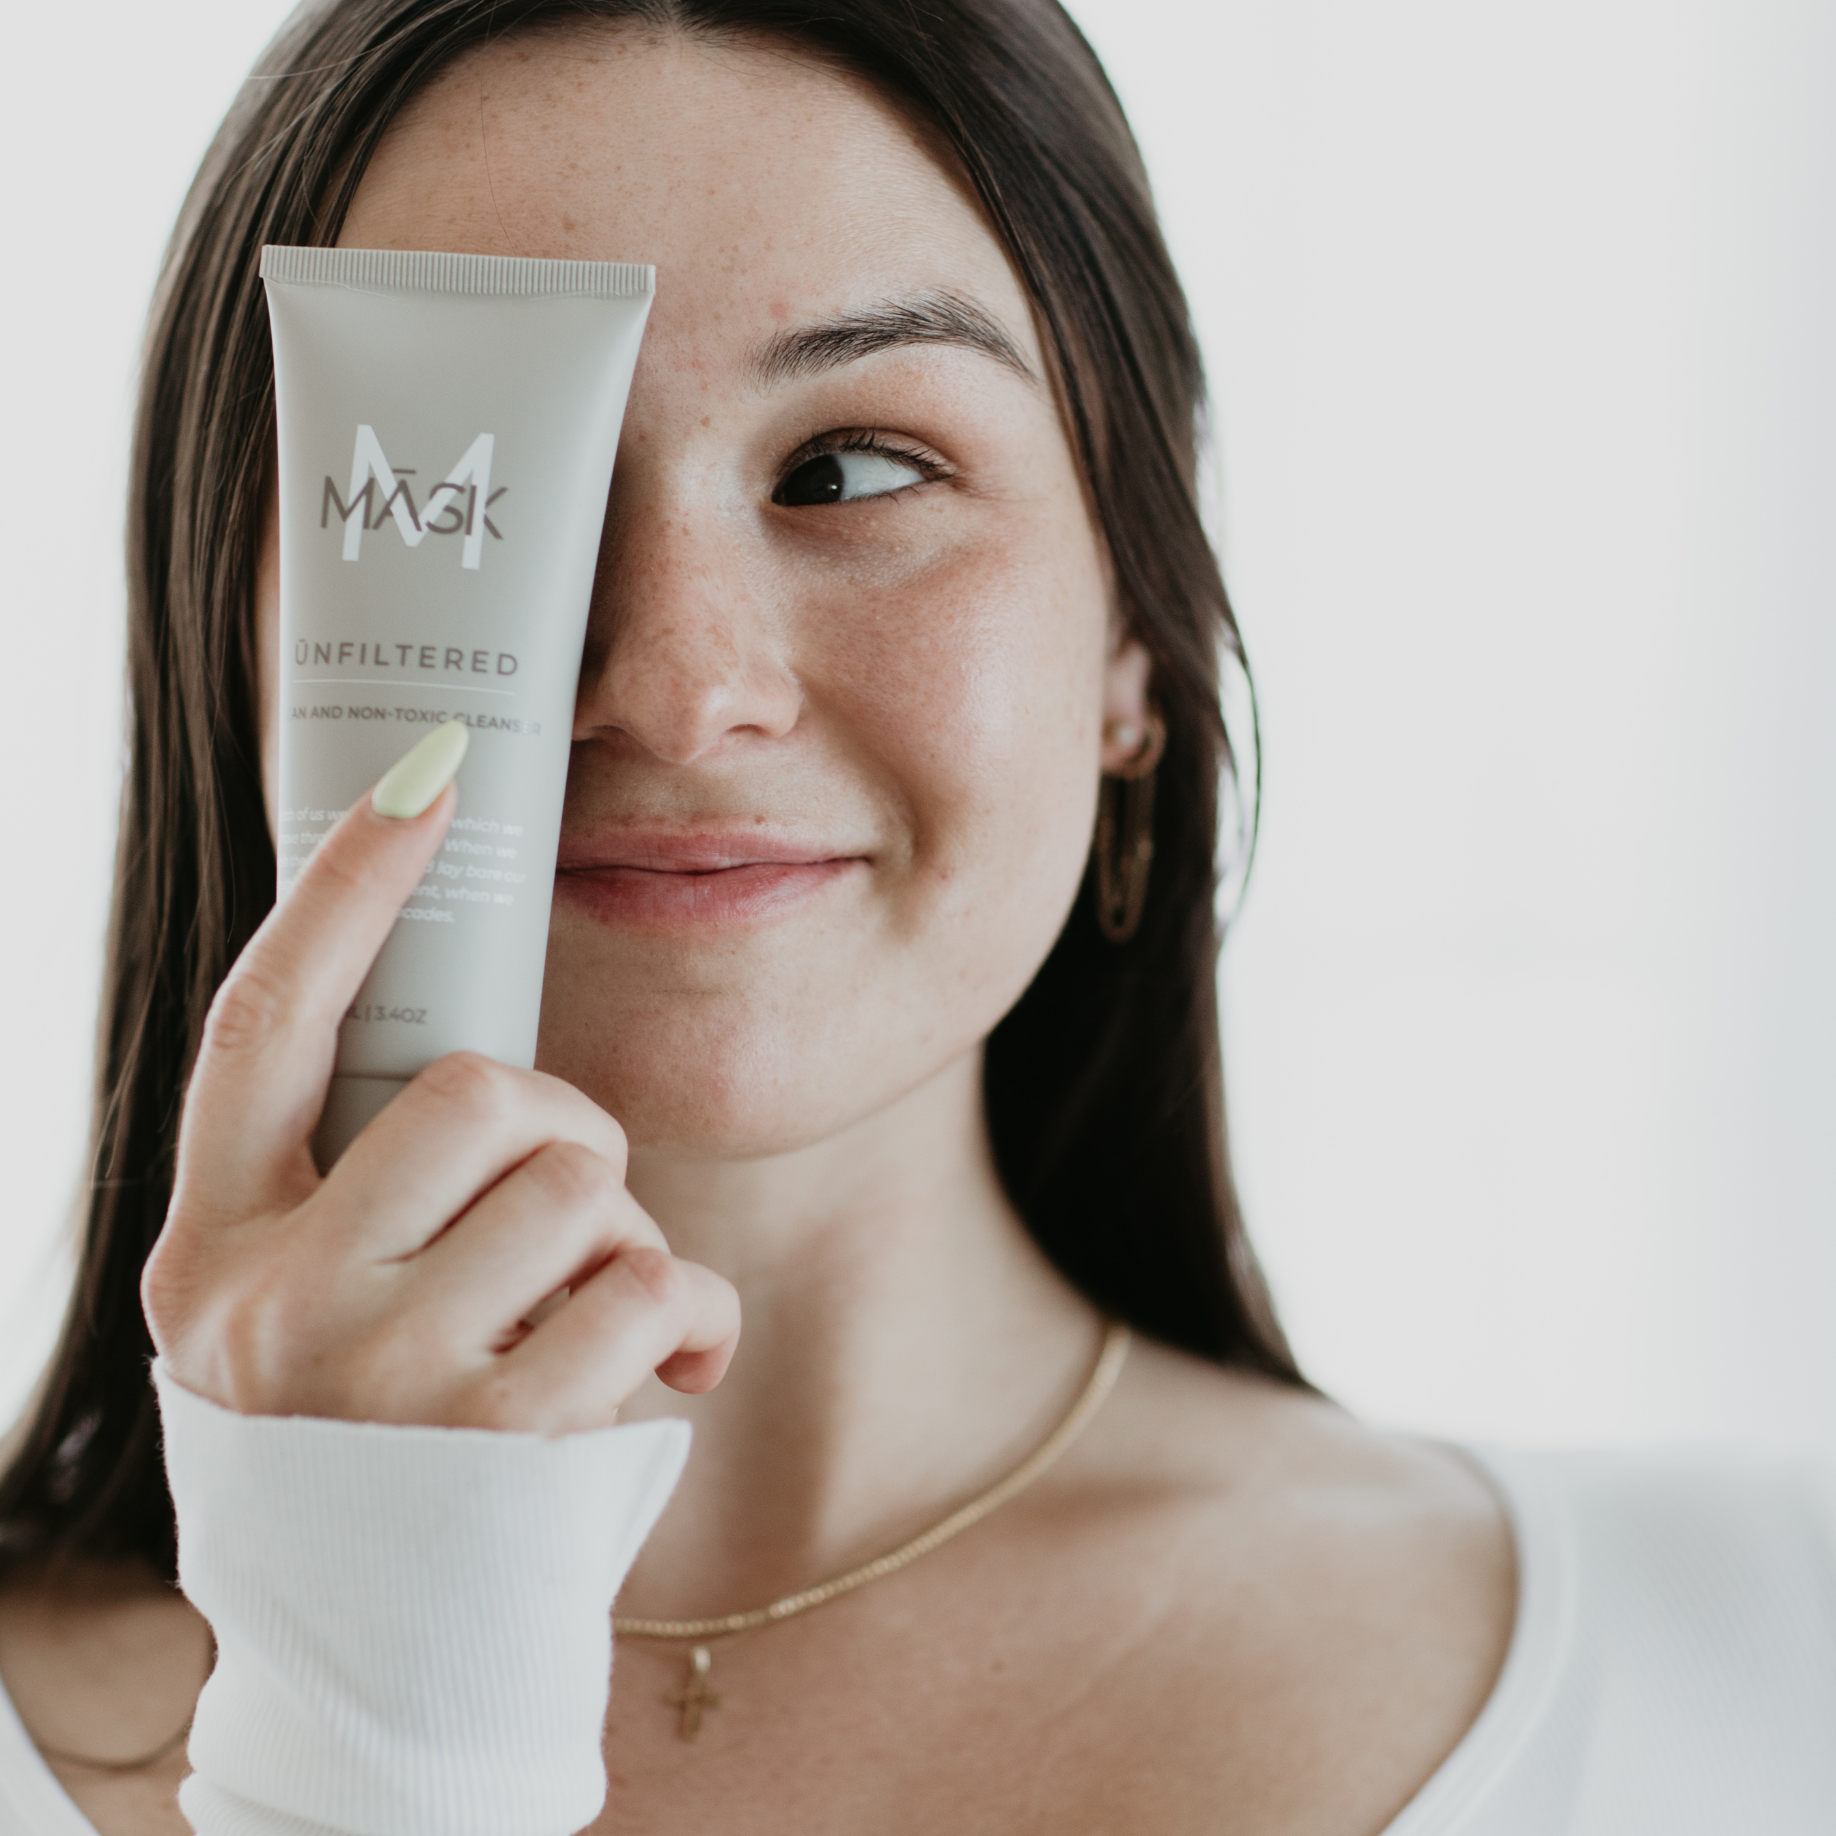 Just Dropped: MASK Unfiltered Skin Soothing Cleanser